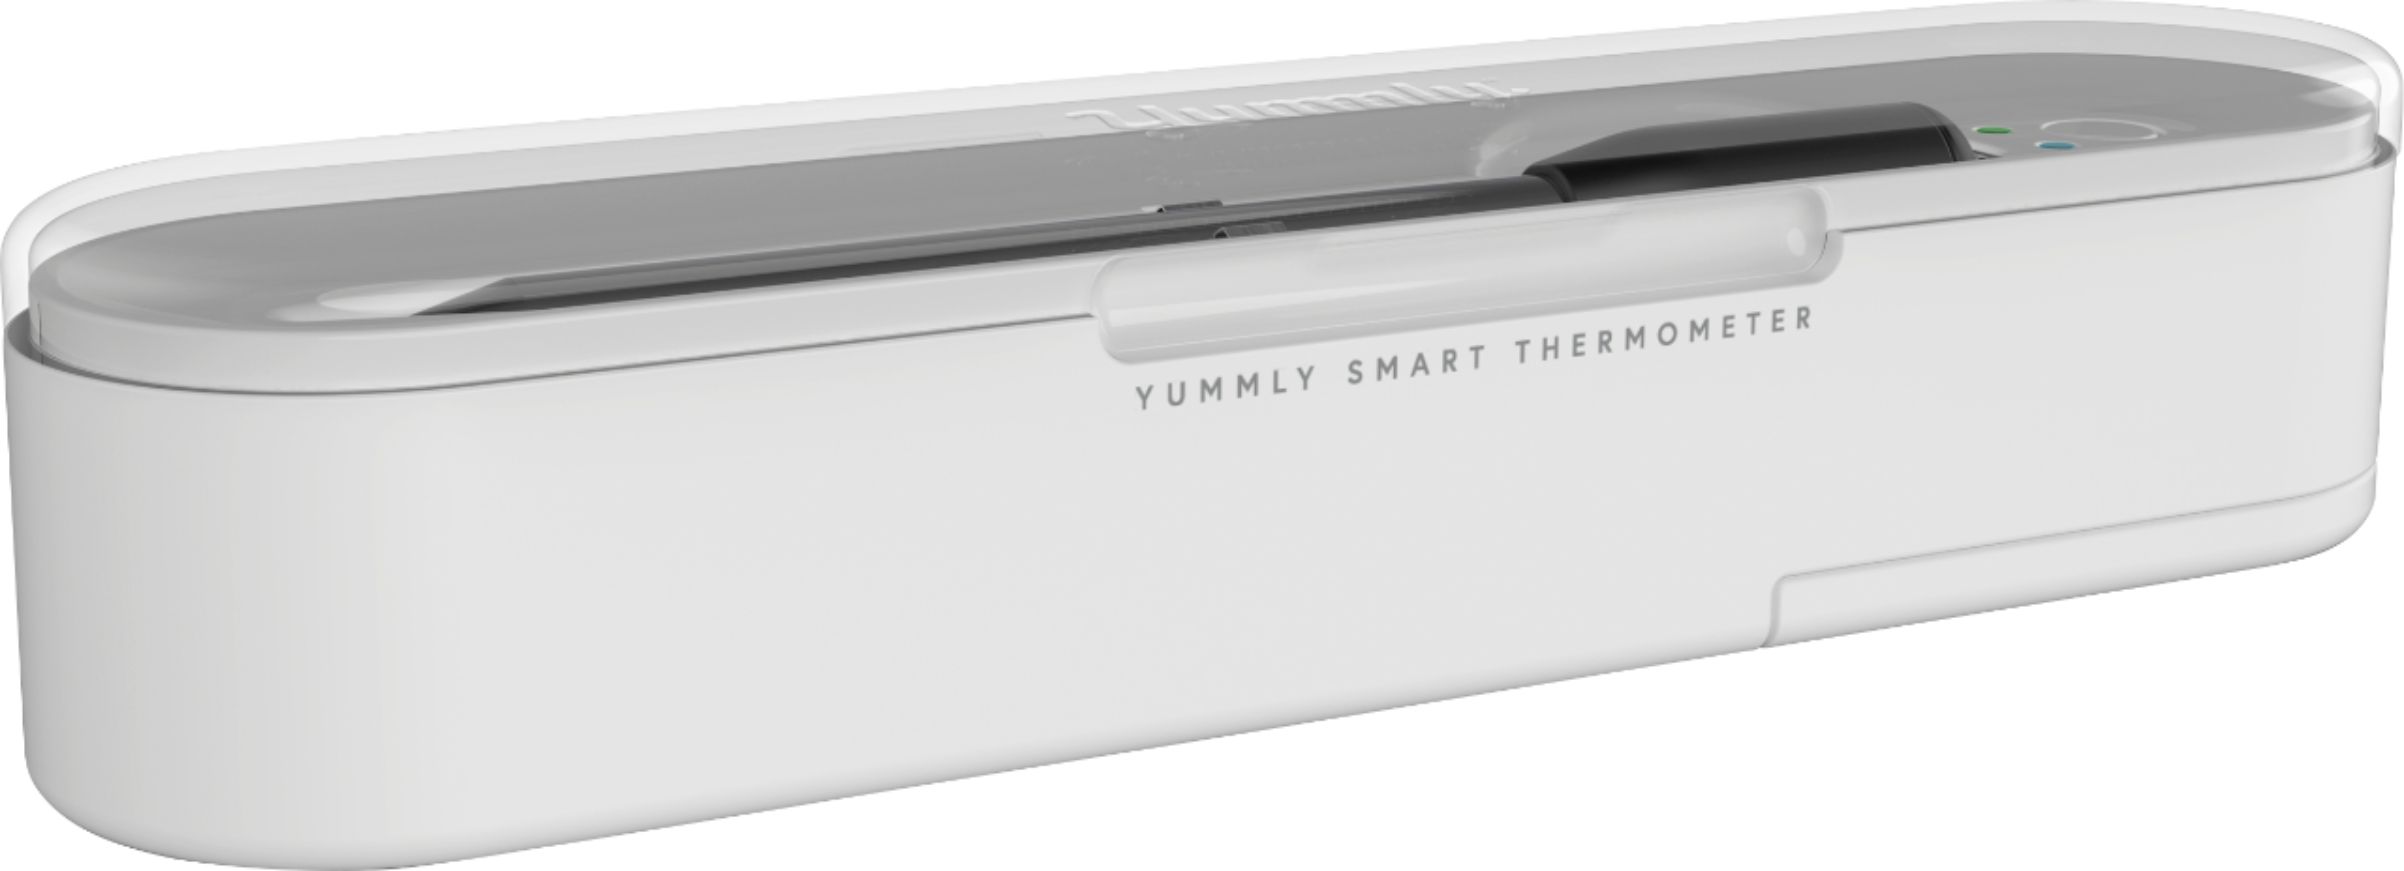 Yummly Smart Thermometer-Graphite-Bluetooth Connectivity-Brand NEW